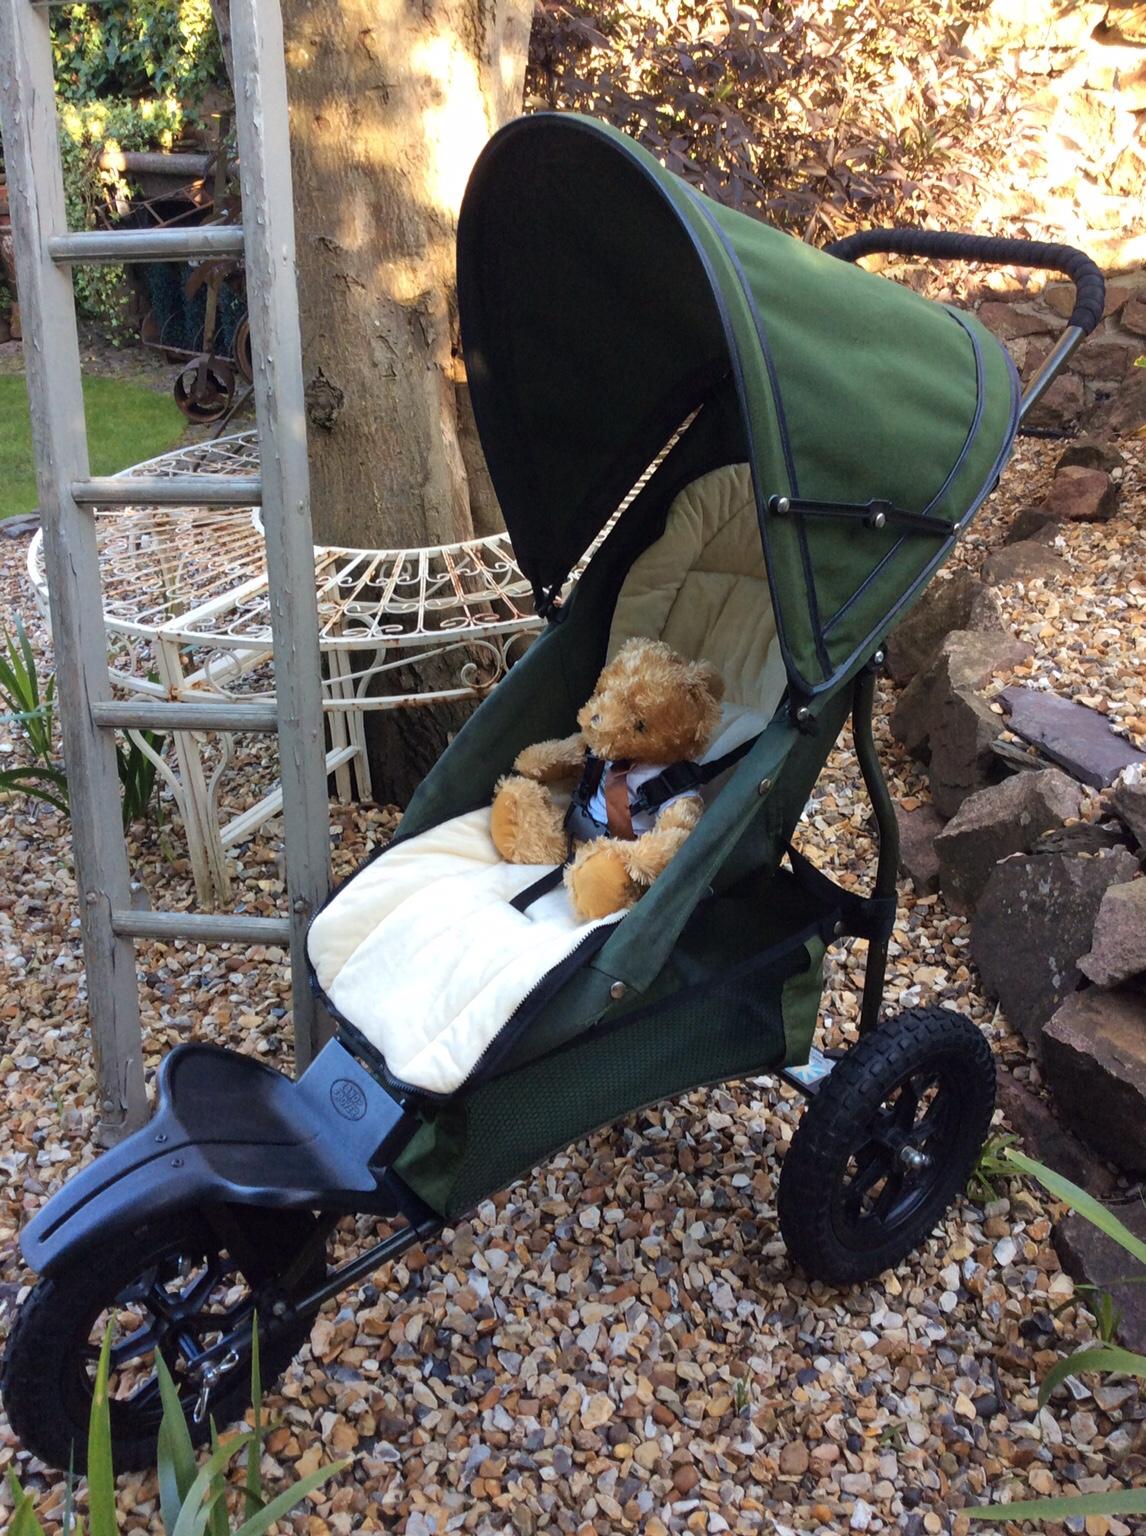 land rover pushchair for sale